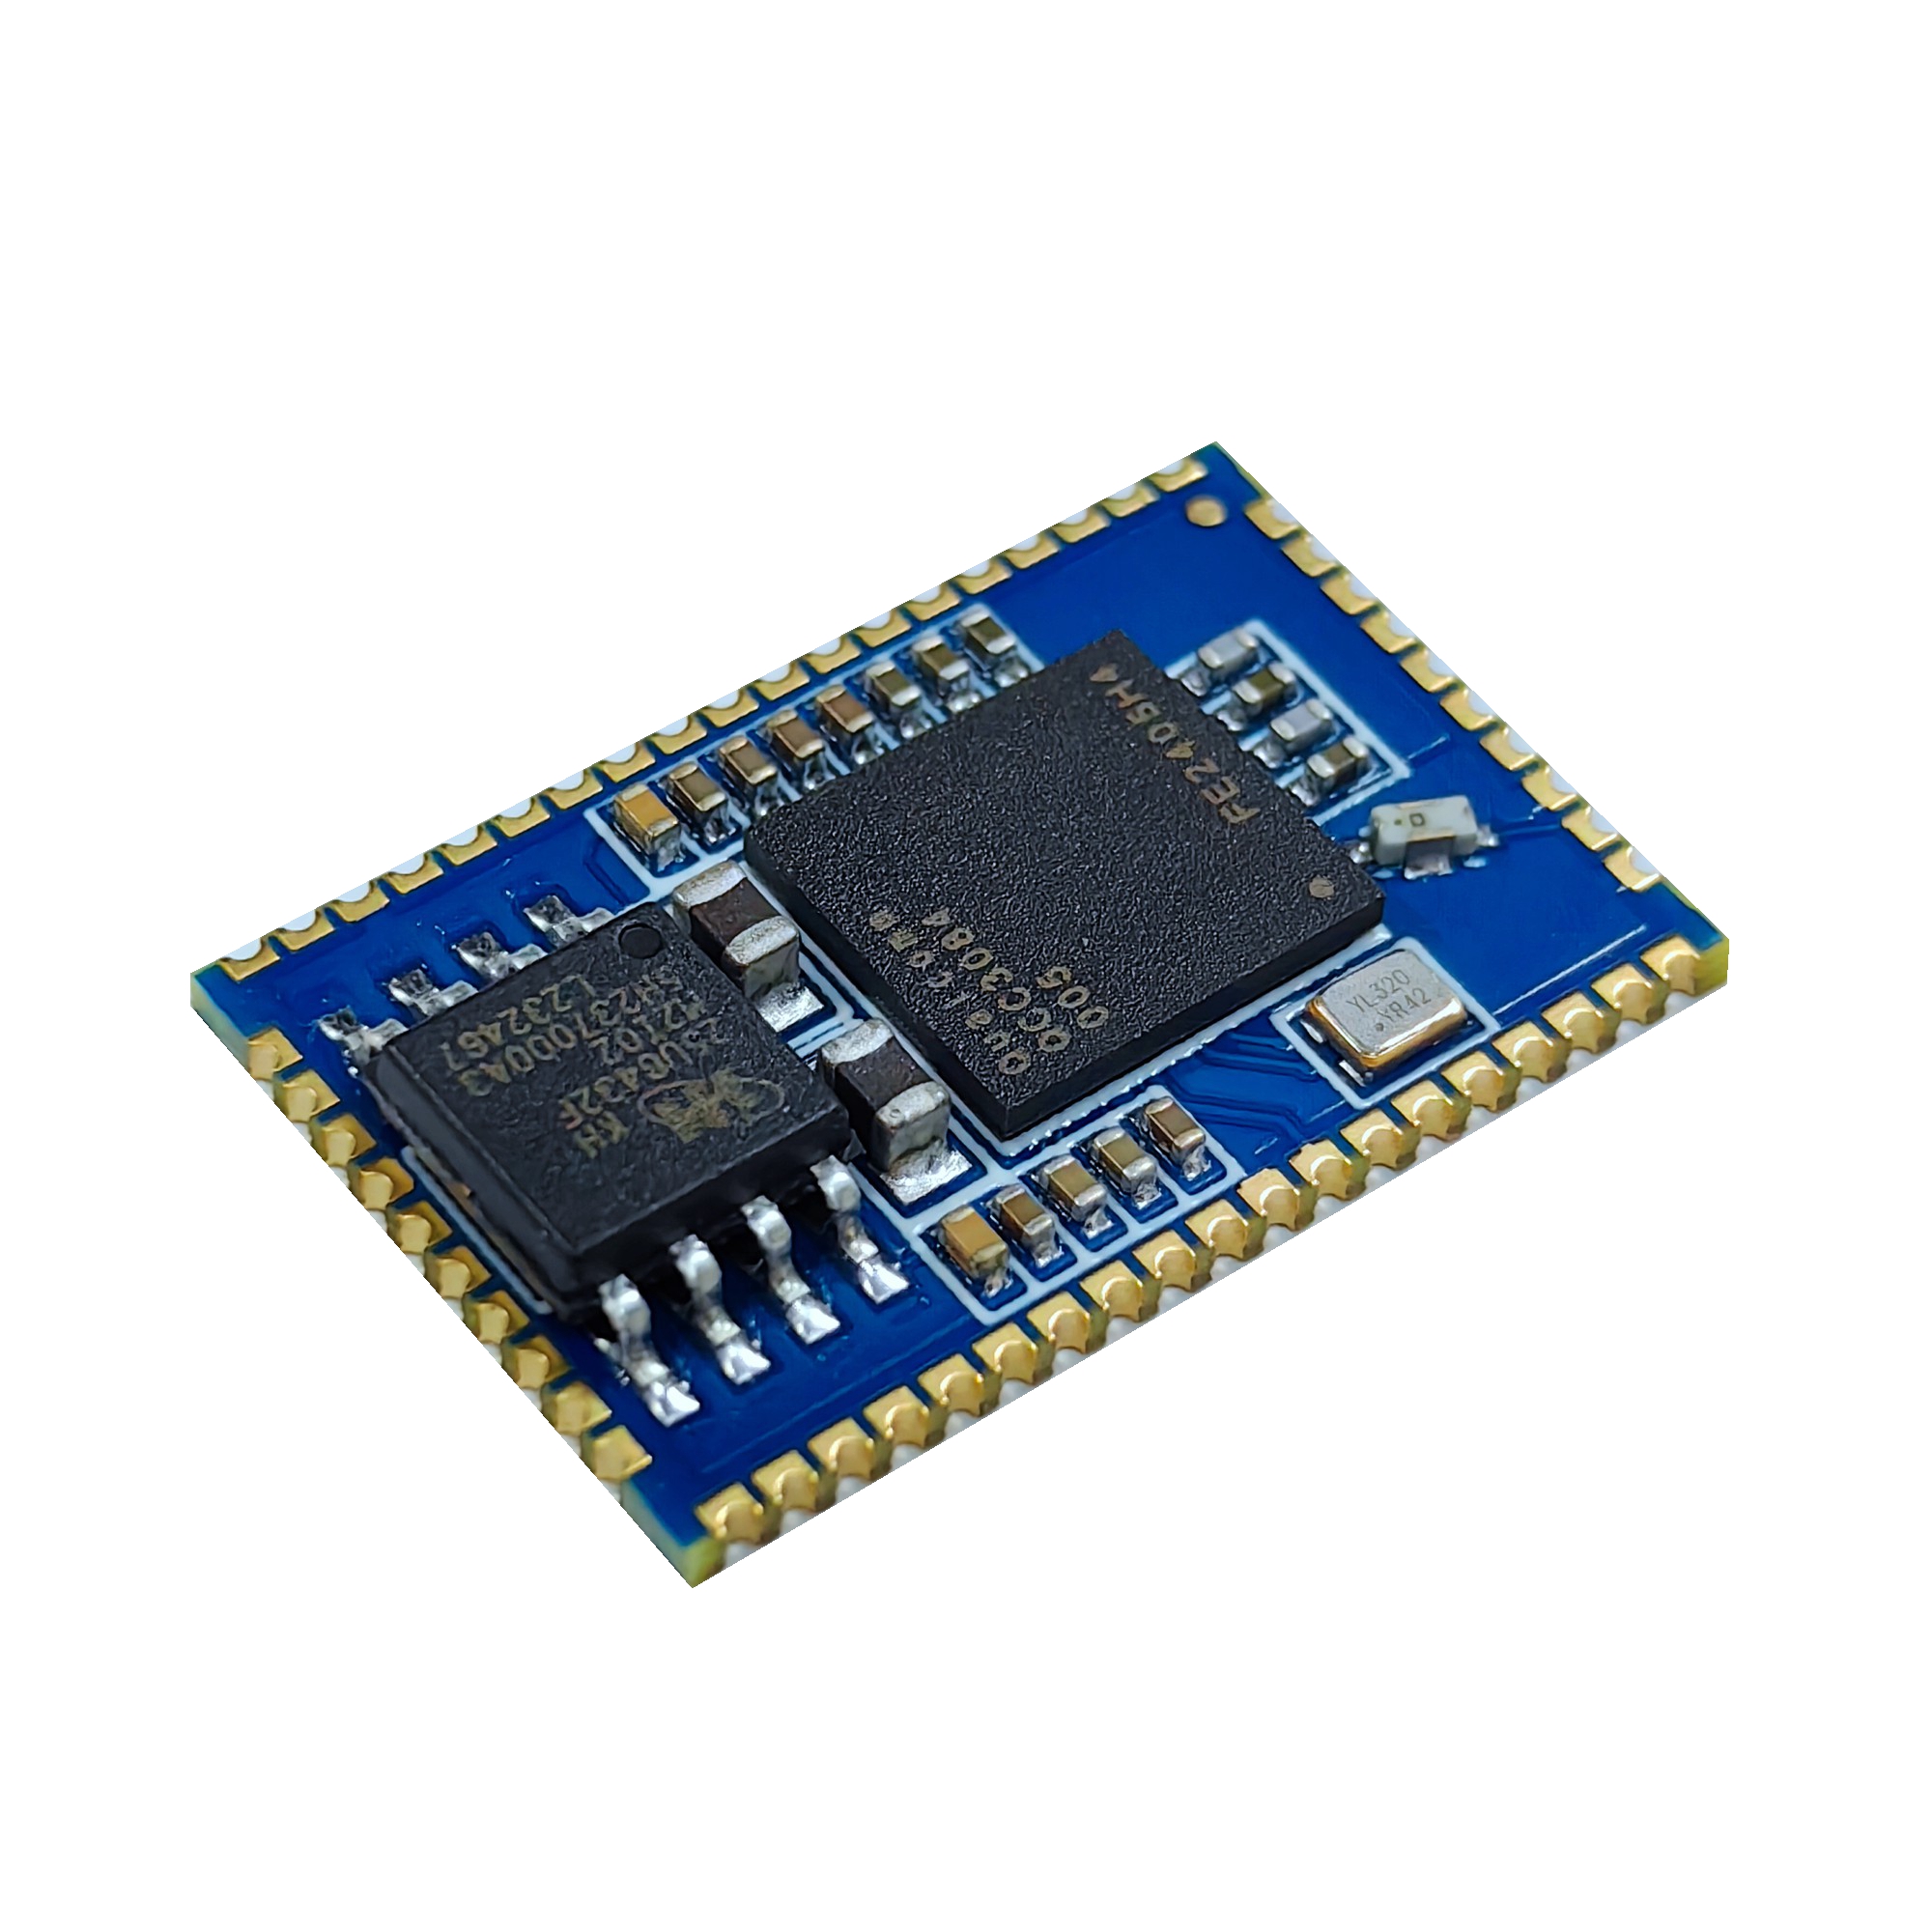 Introduction to BTM384 (QCC3084) Bluetooth module